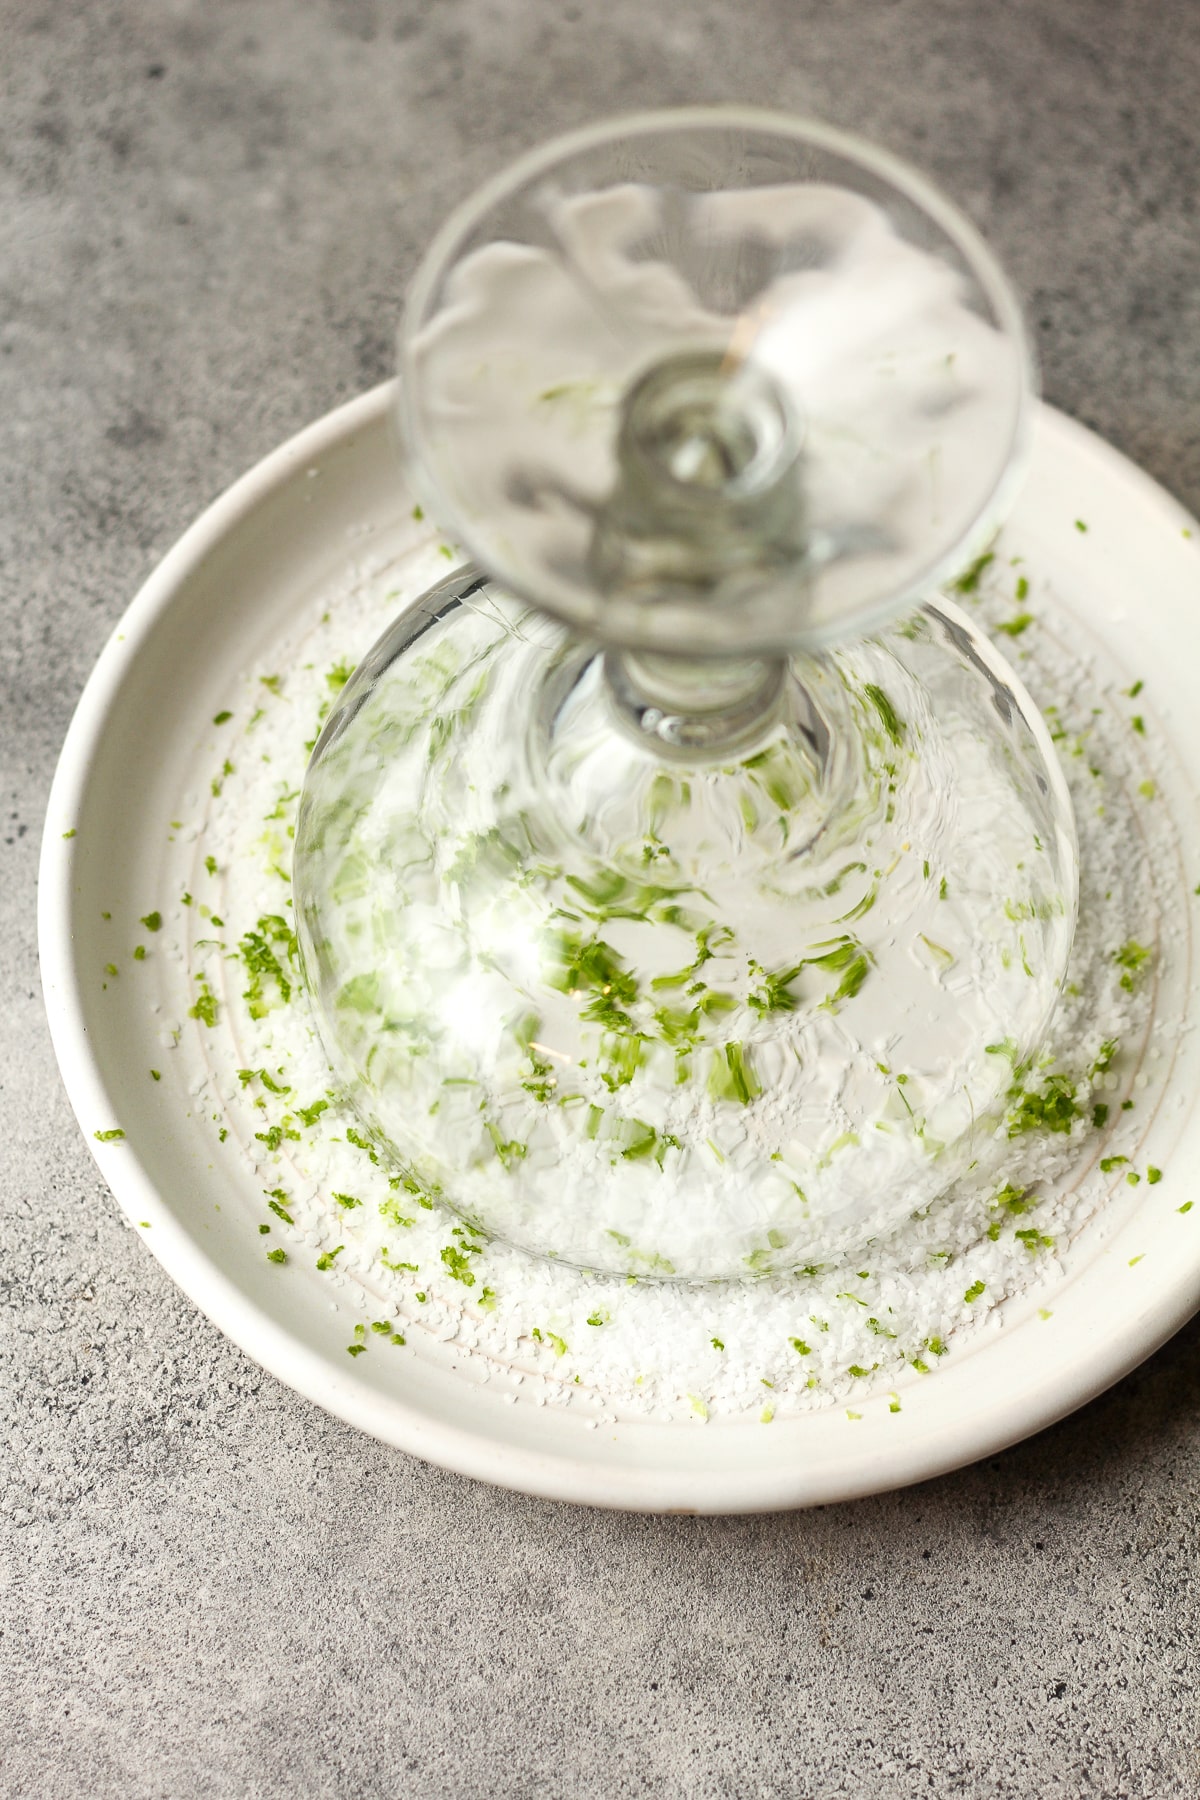 A margarita glass turned upside down on a plate of salt and lime zest.